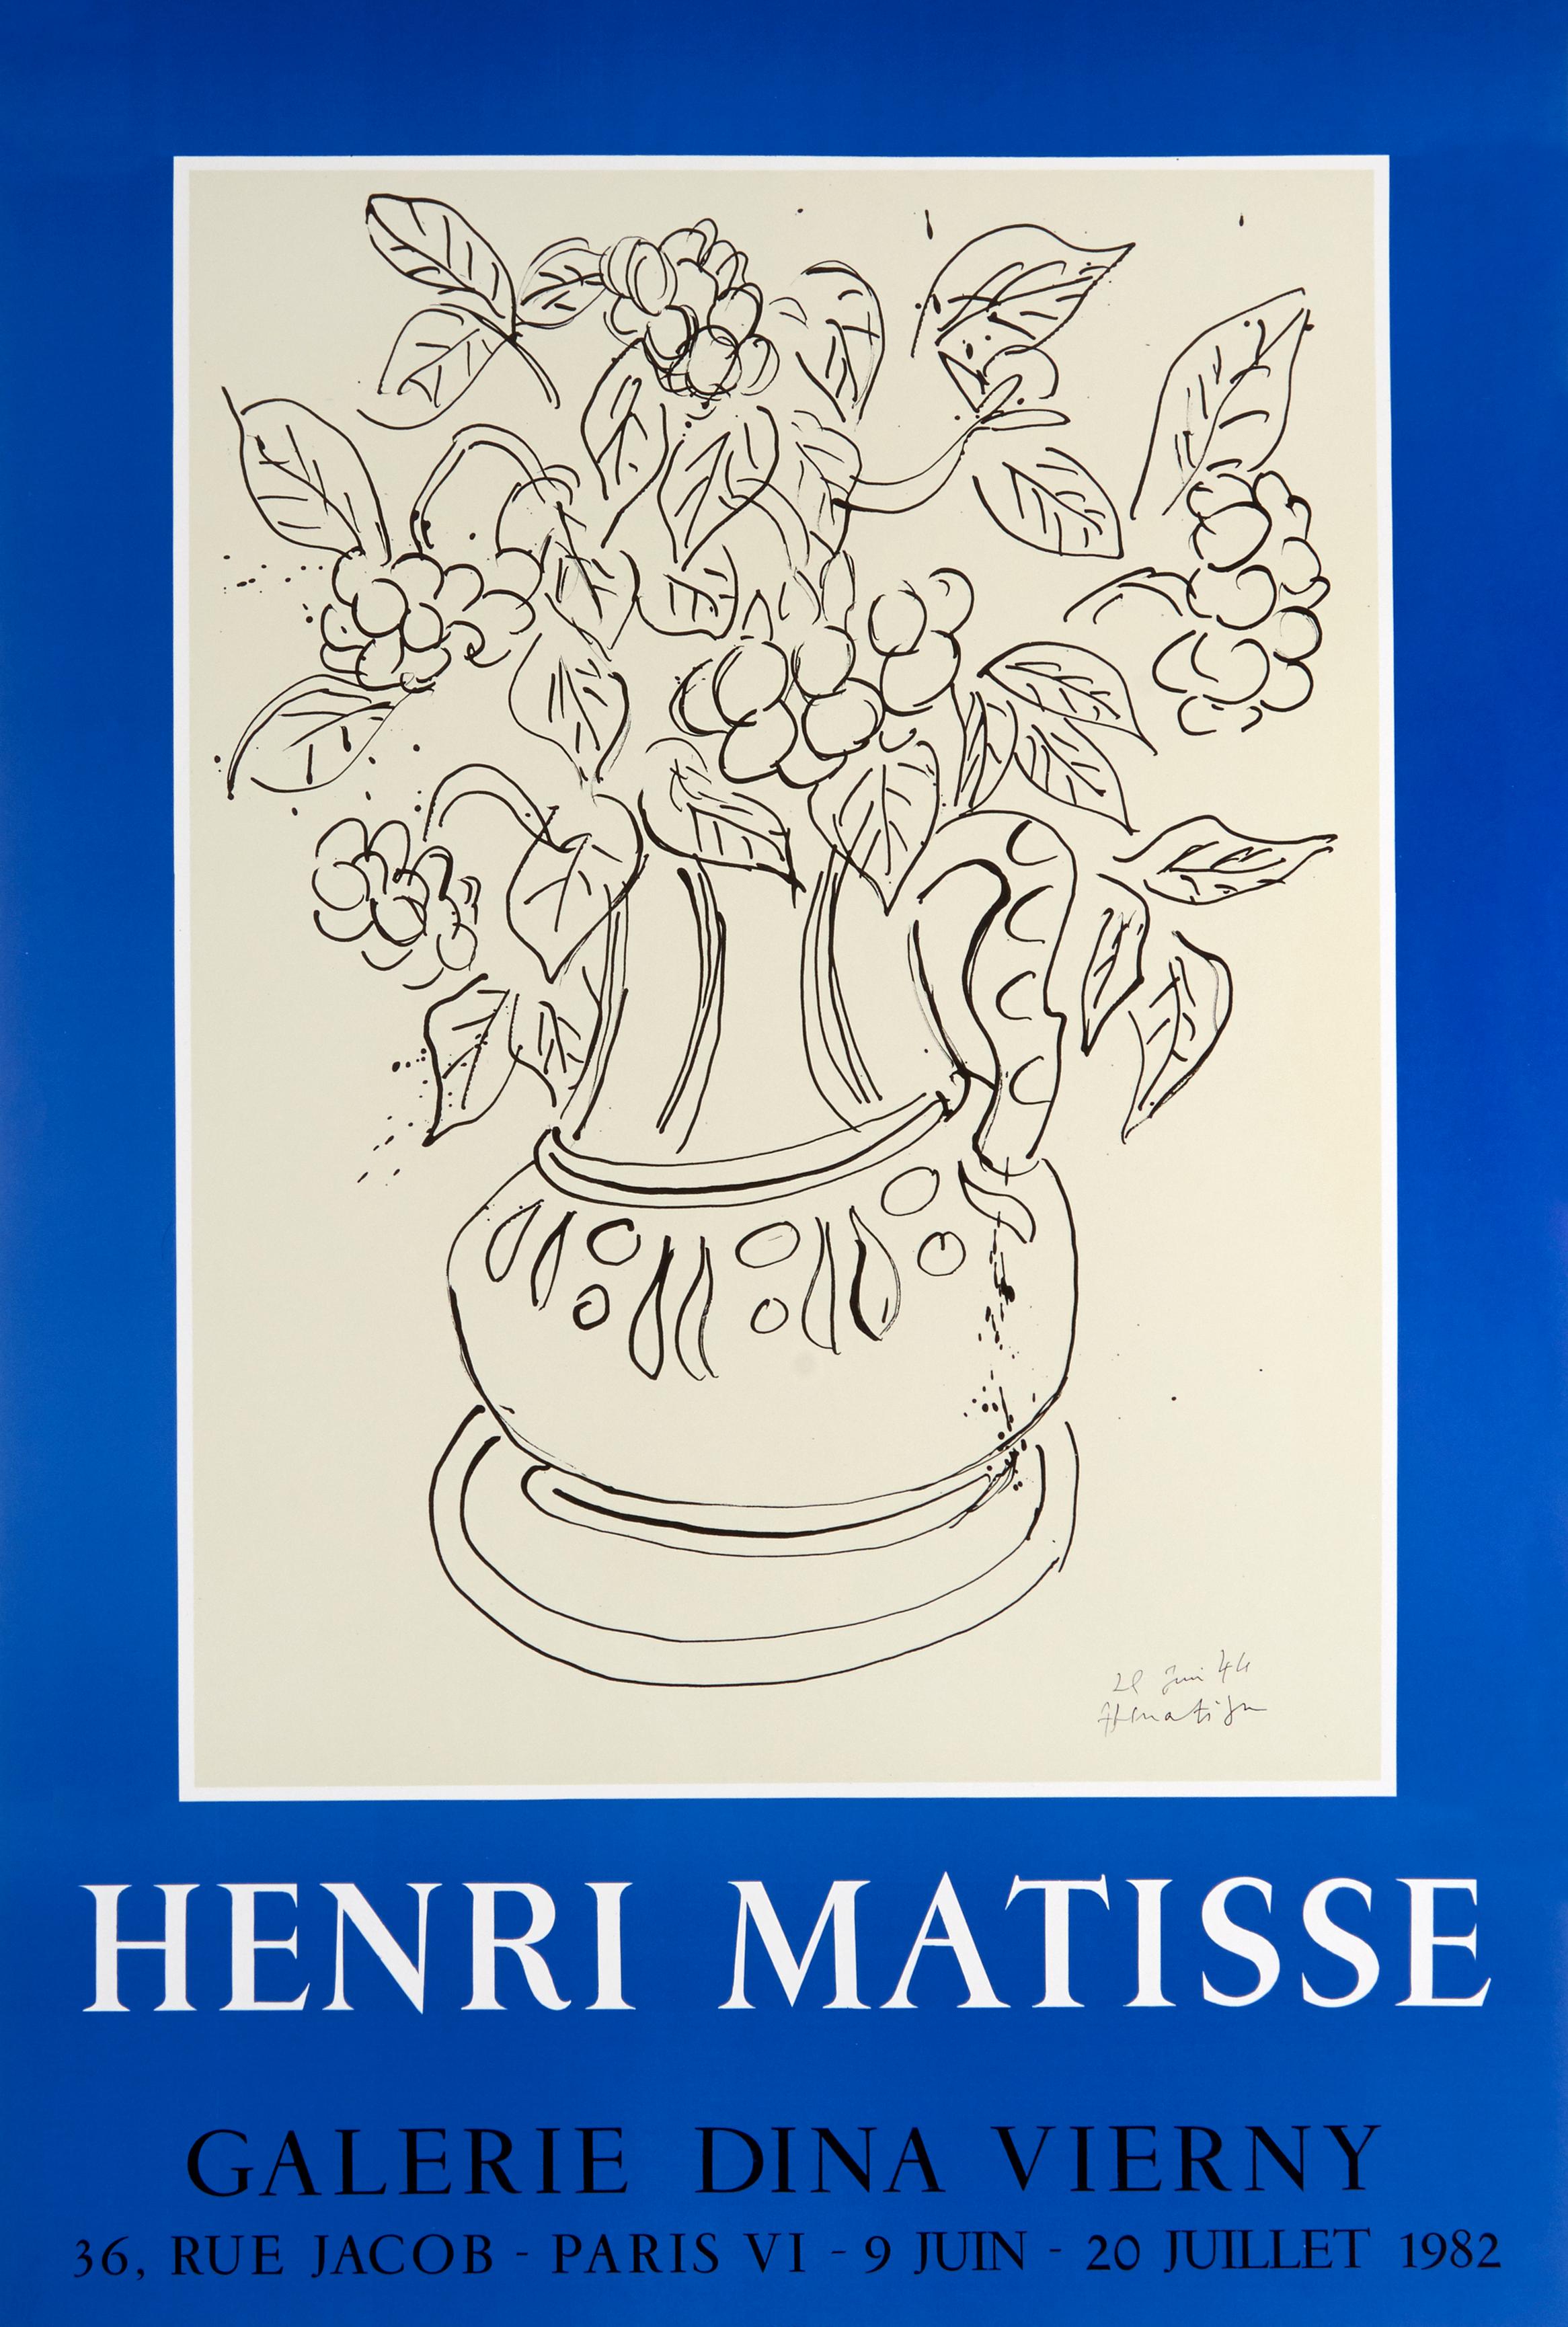 (after) Henri Matisse Print - Galerie Dina Vierny by Henri Matisse lithographic poster